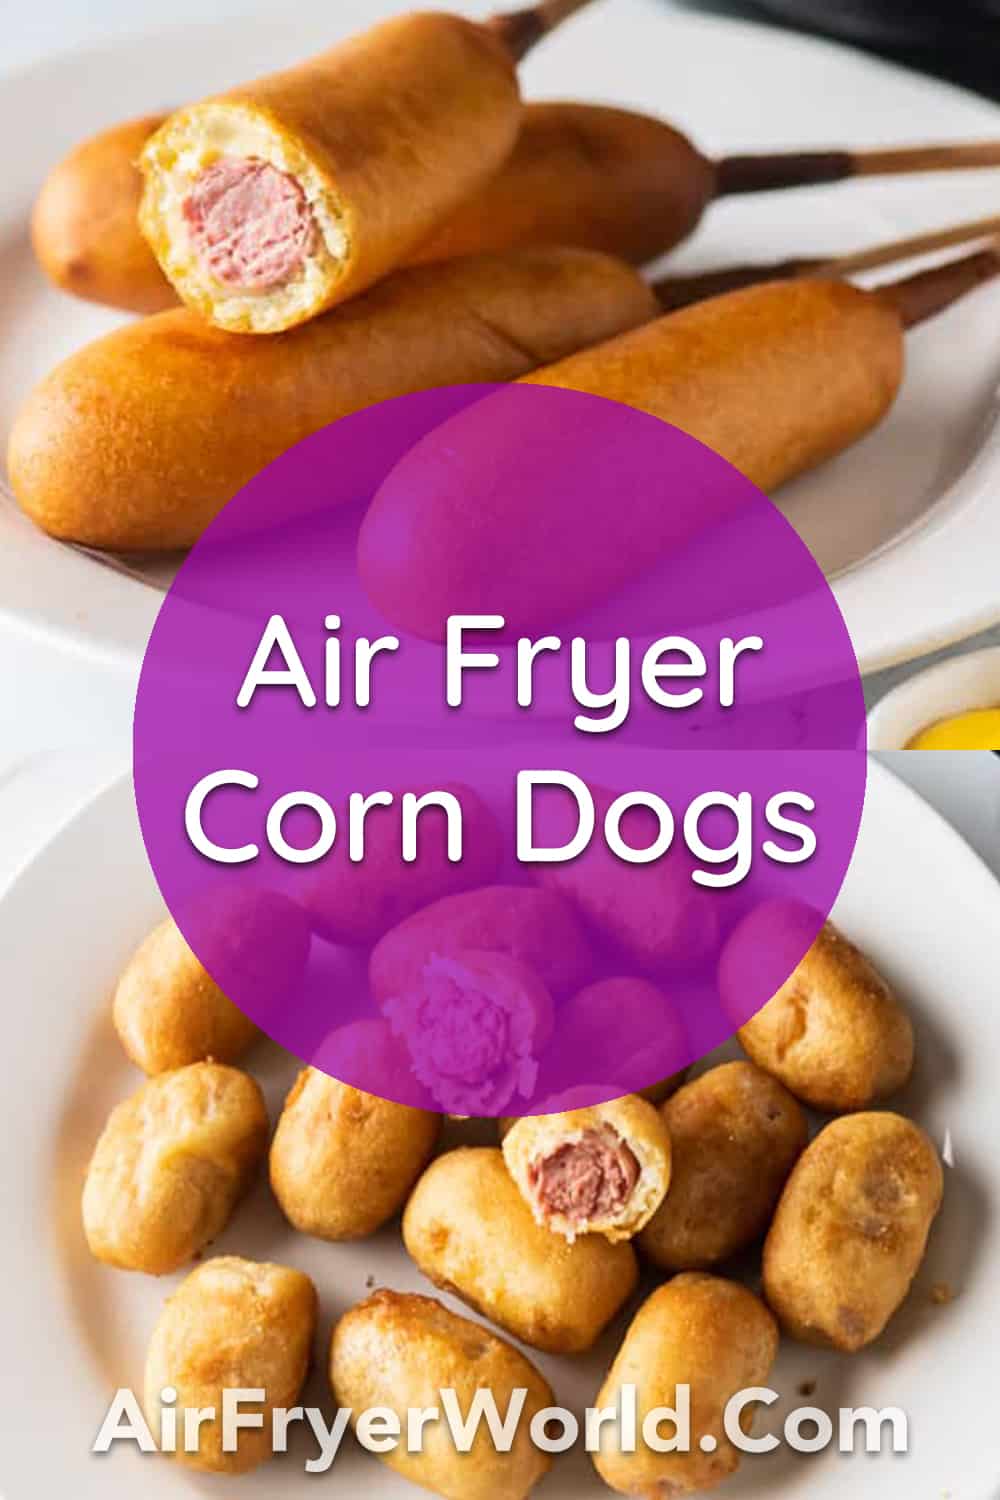 Air Fried Corn Dogs from Frozen is Easy in 10 min | Air Fryer World